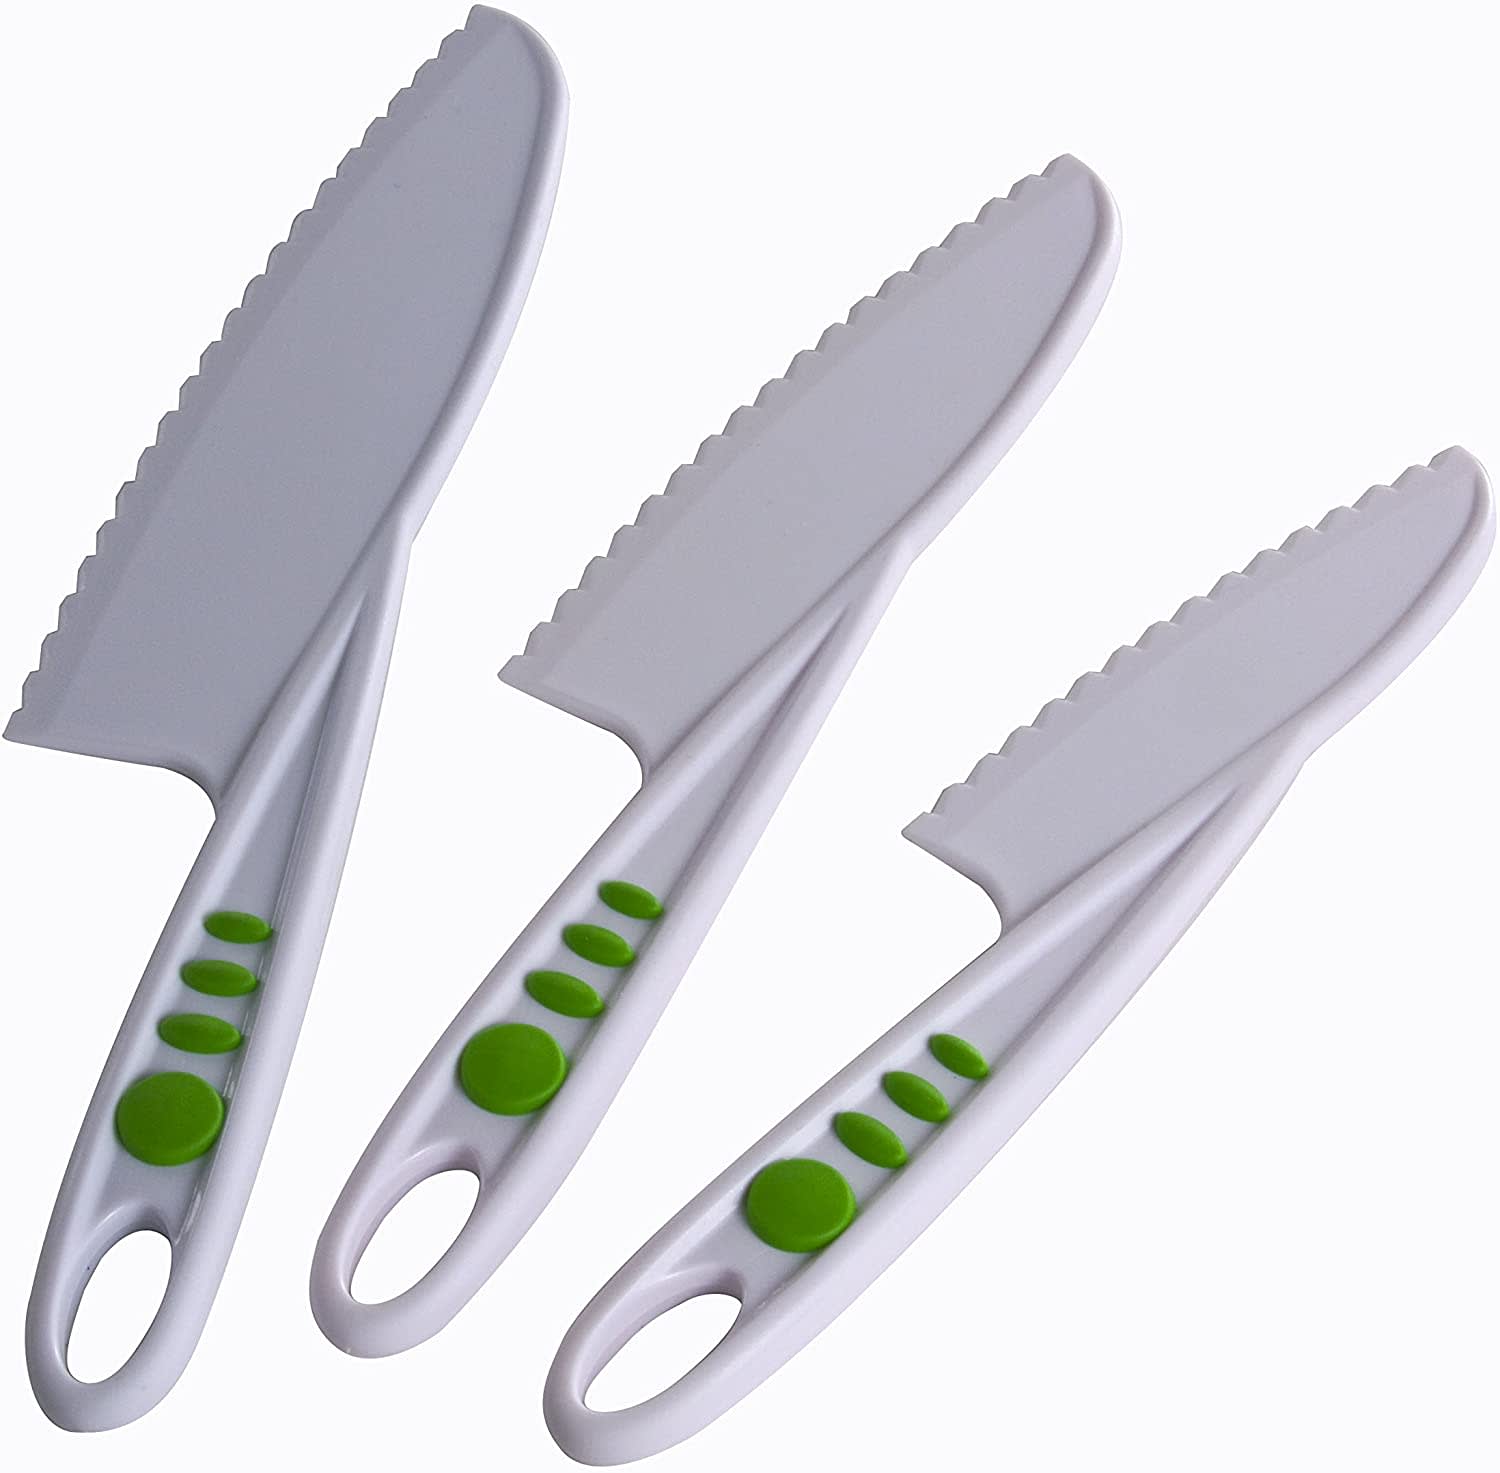 Children's Knives Review – A Beautiful Childhood